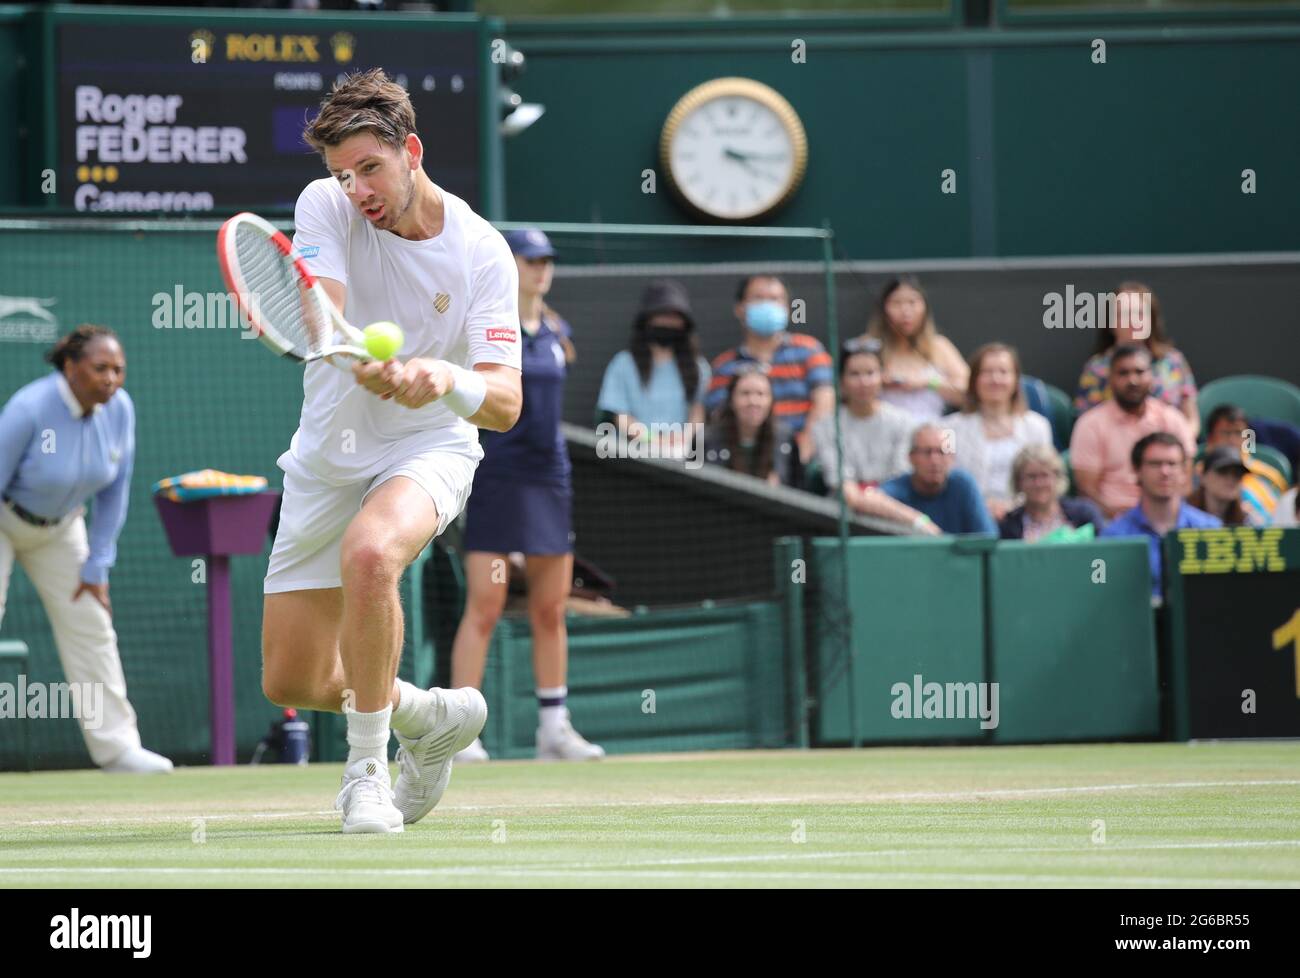 London, UK. 03rd July, 2021. Cameron Norrie in his match against Roger Federer at Wimbledon Day Six Credit: Paul Marriott/Alamy Live News Stock Photo